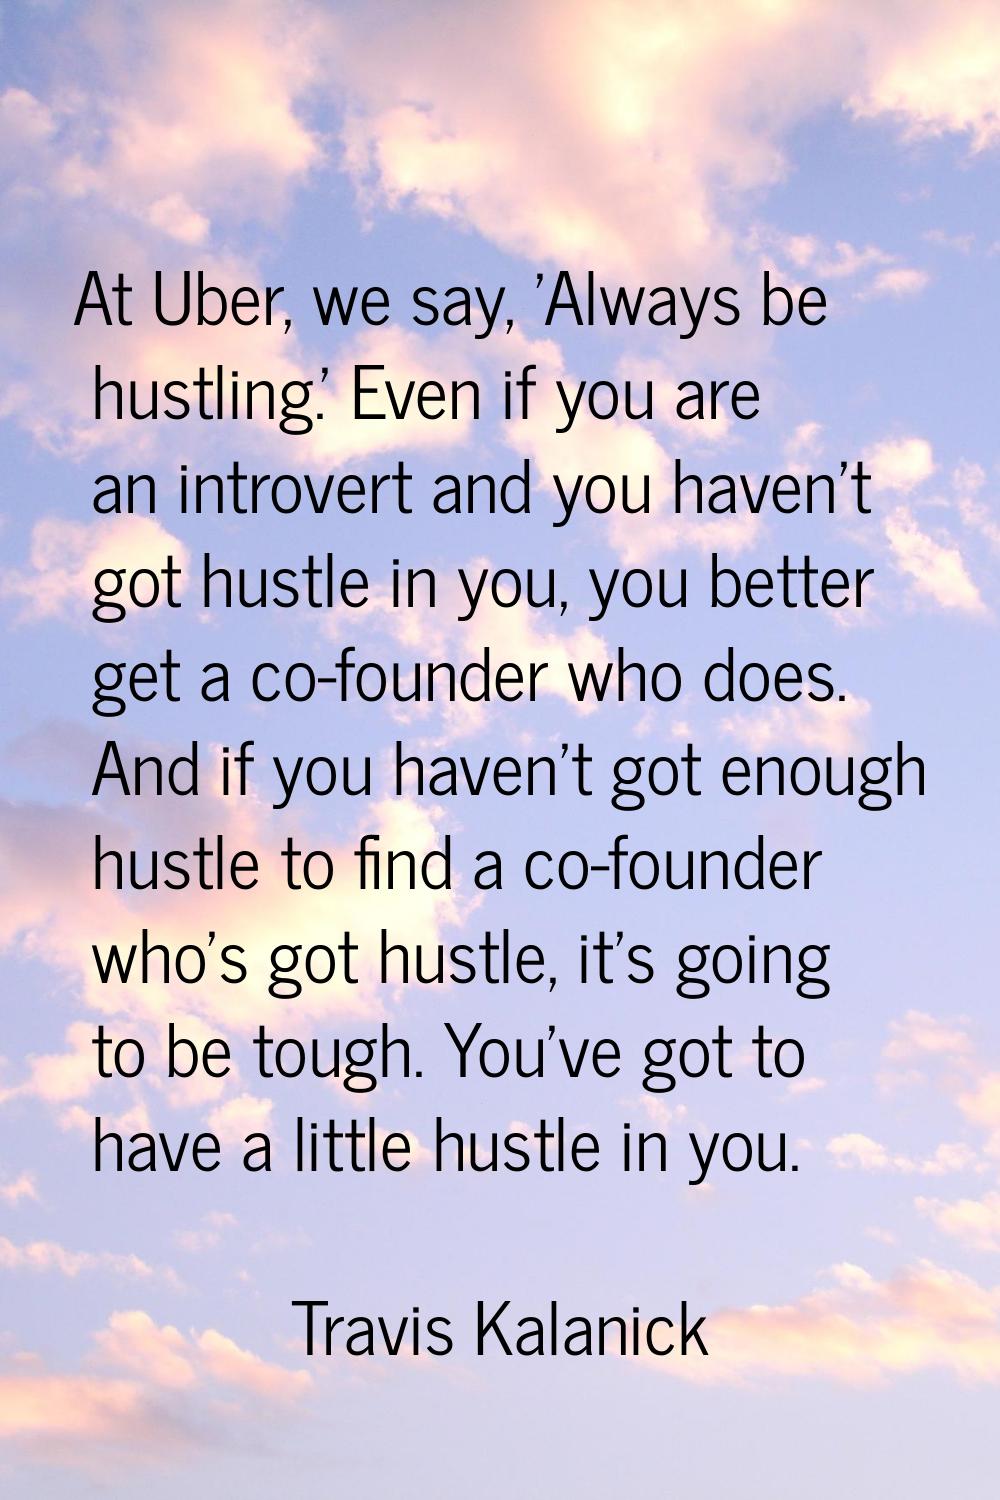 At Uber, we say, 'Always be hustling.' Even if you are an introvert and you haven't got hustle in y